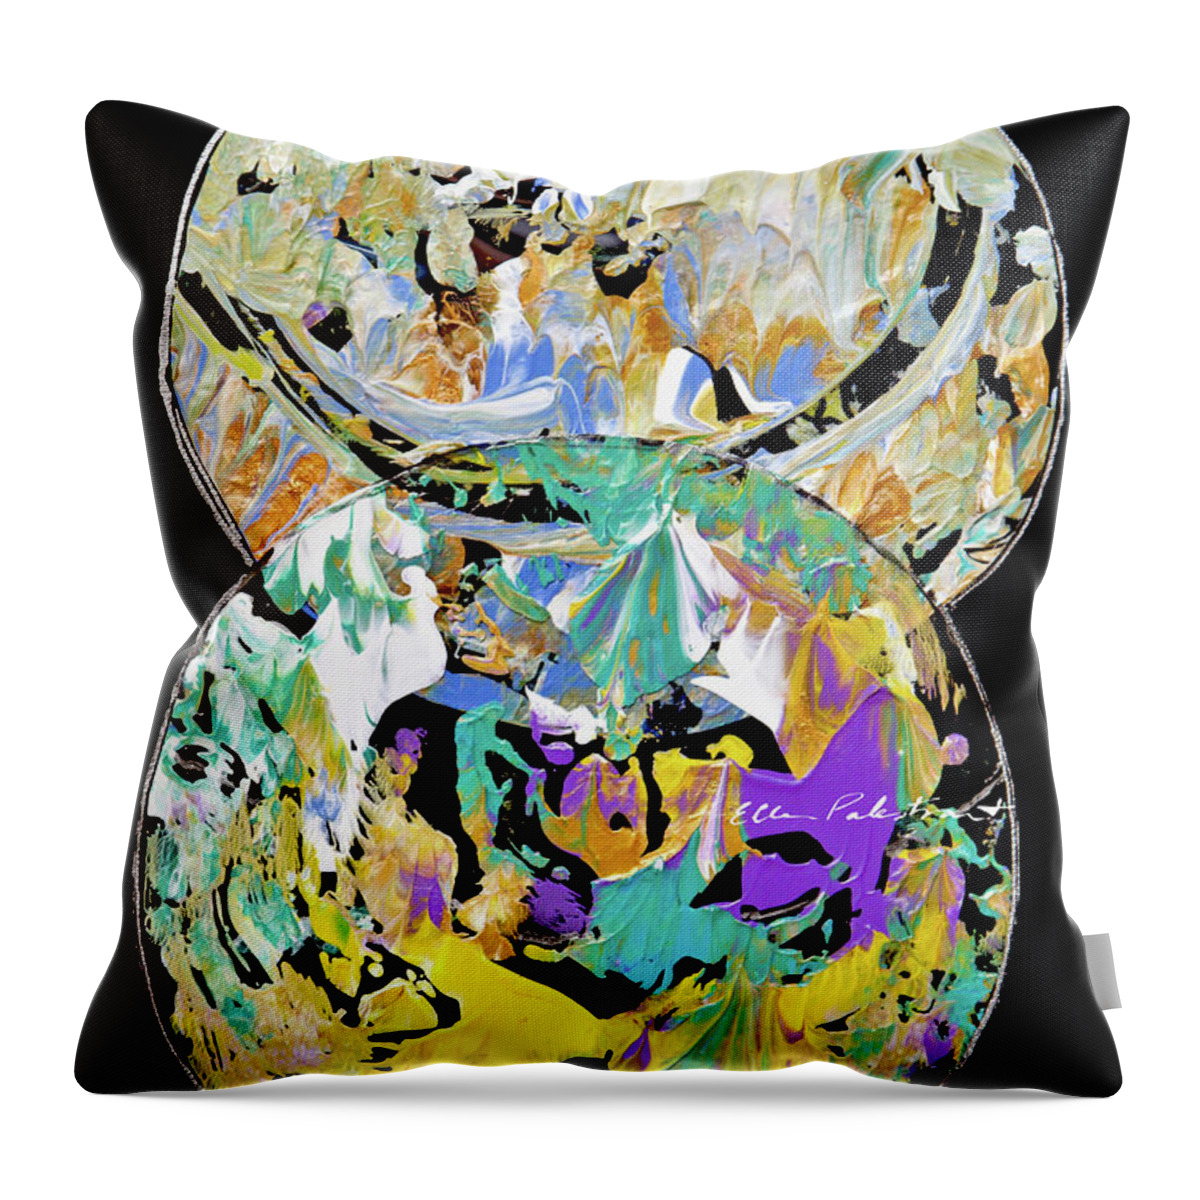 Wall Art Throw Pillow featuring the painting Interplanetary Dance - Vertical by Ellen Palestrant